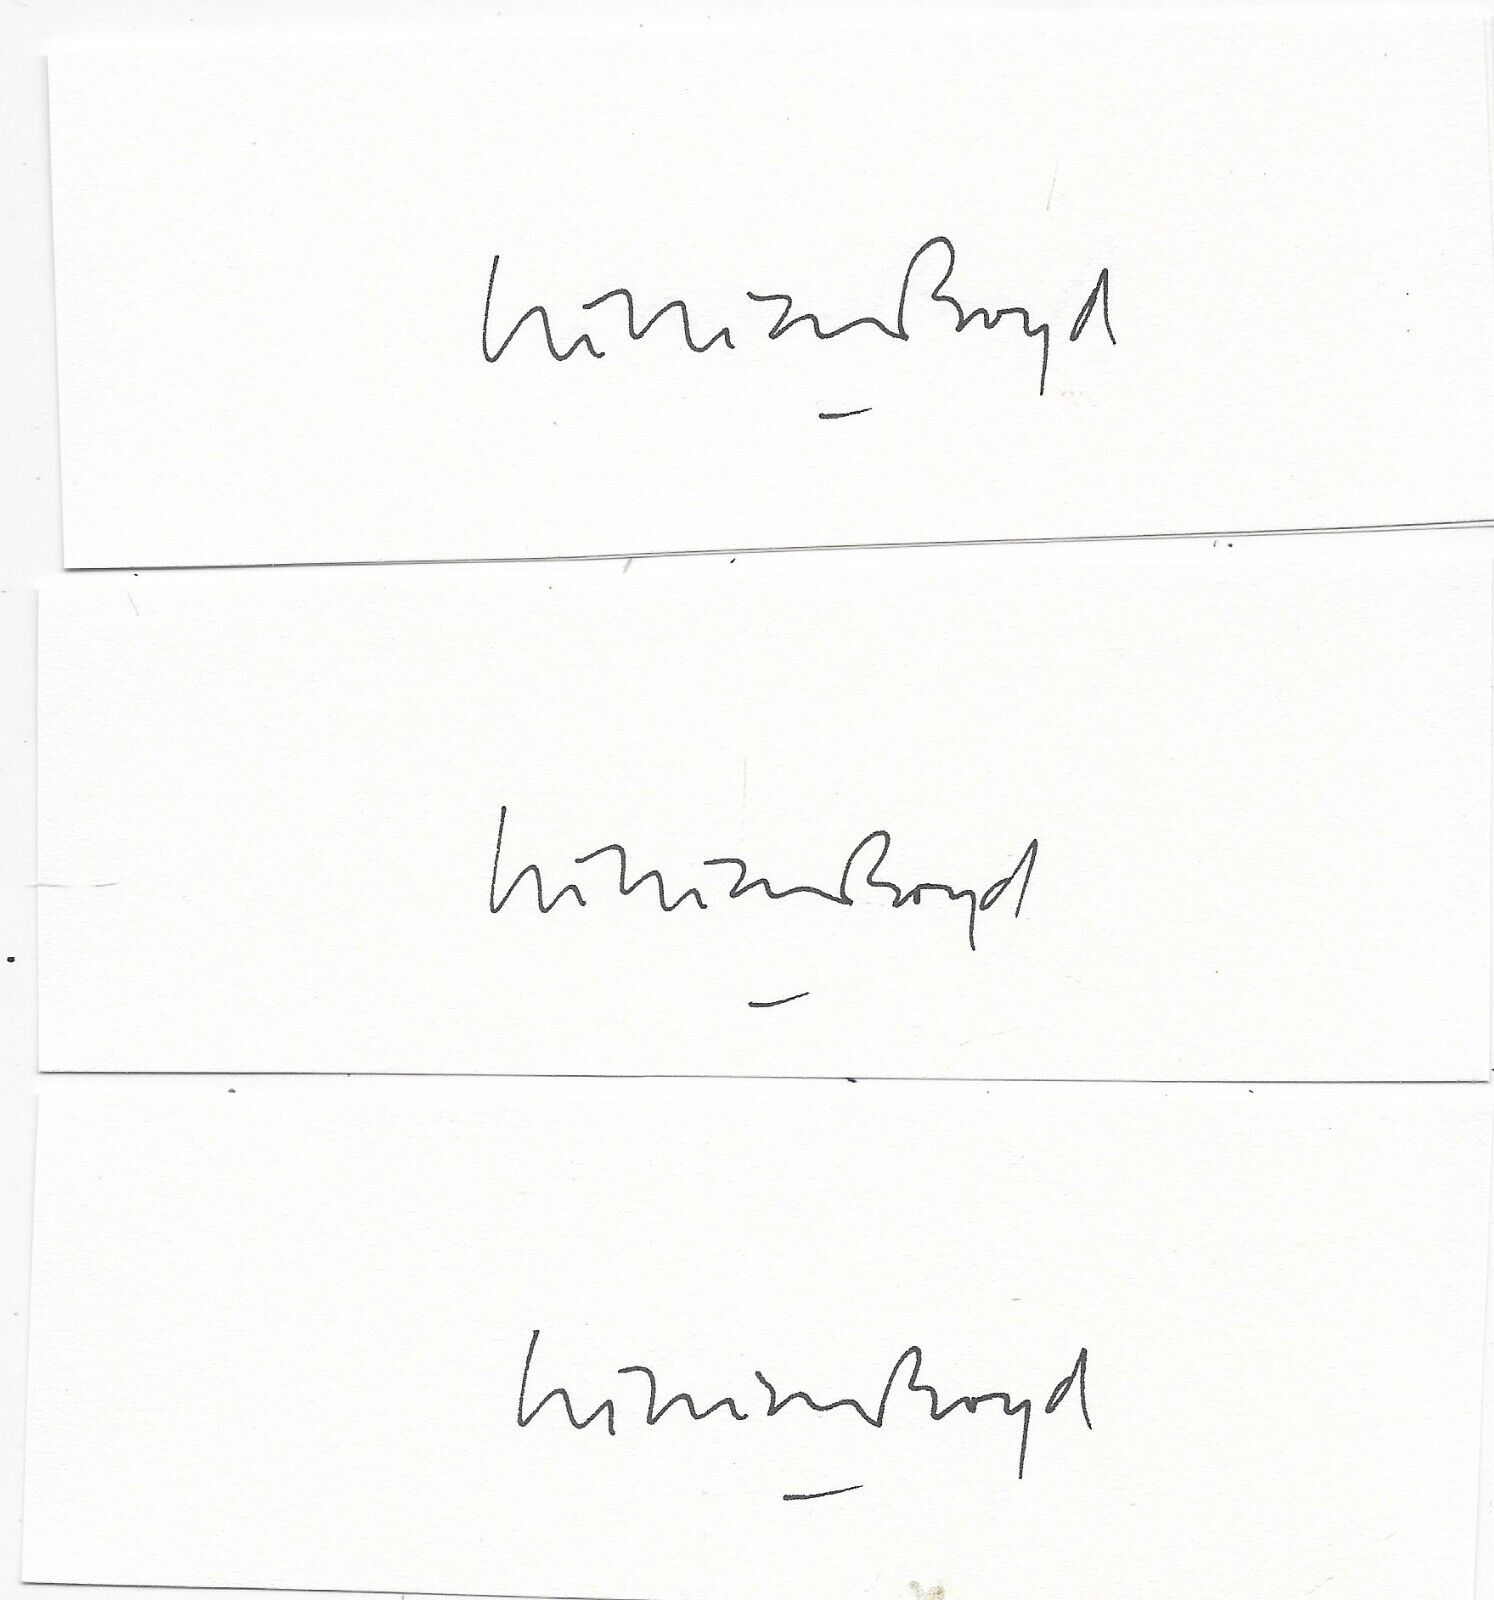 WILLIAM BOYD 3 cut signatures by Boyd cut from extra limitation pages 1988